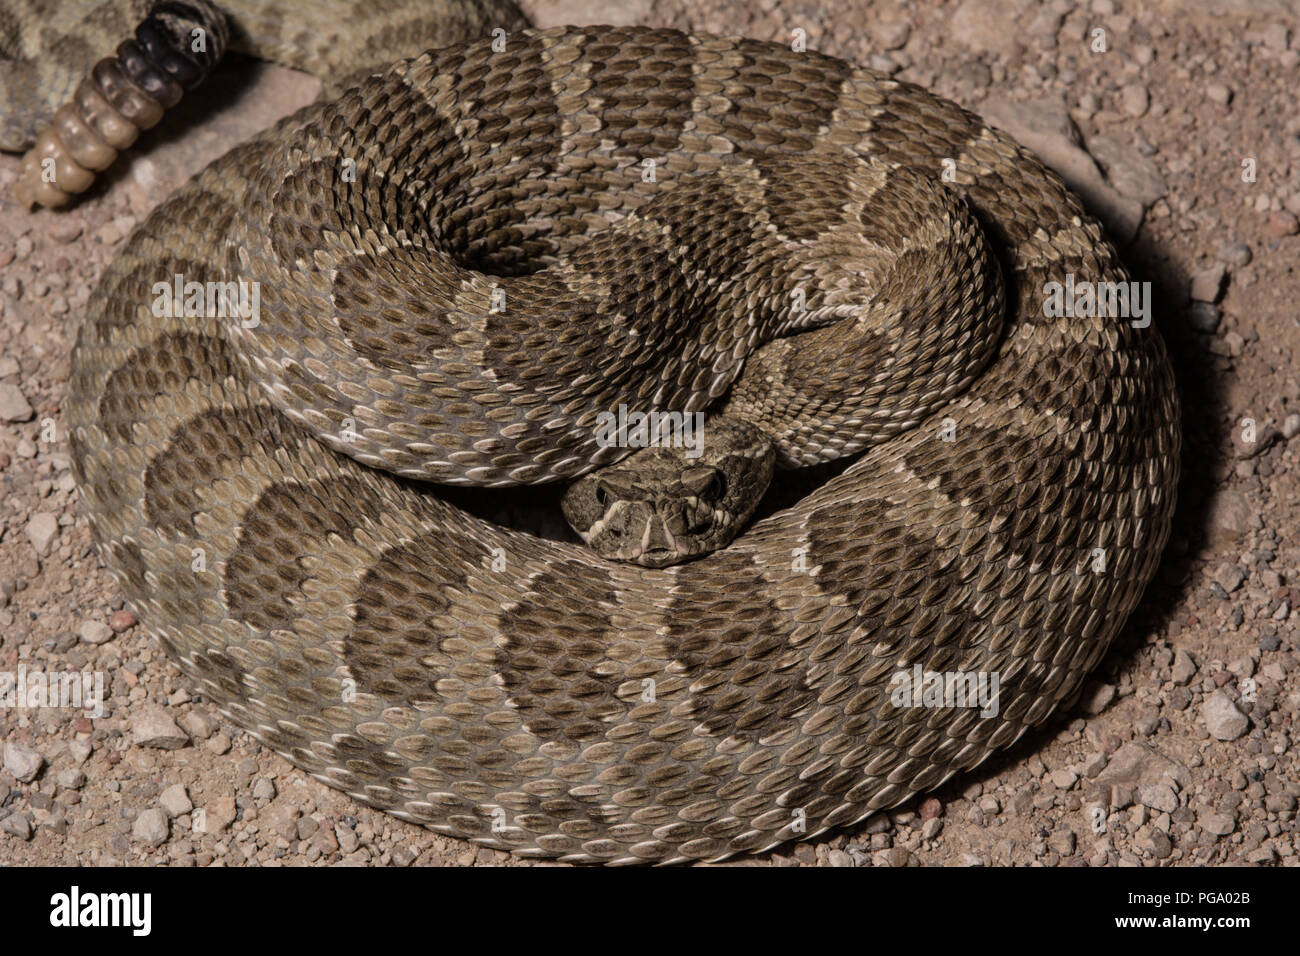 An adult female Prairie Rattlesnake (Crotalus viridis) hiding her head and coiled defensively after being interrupted crossing a gravel road. Stock Photo